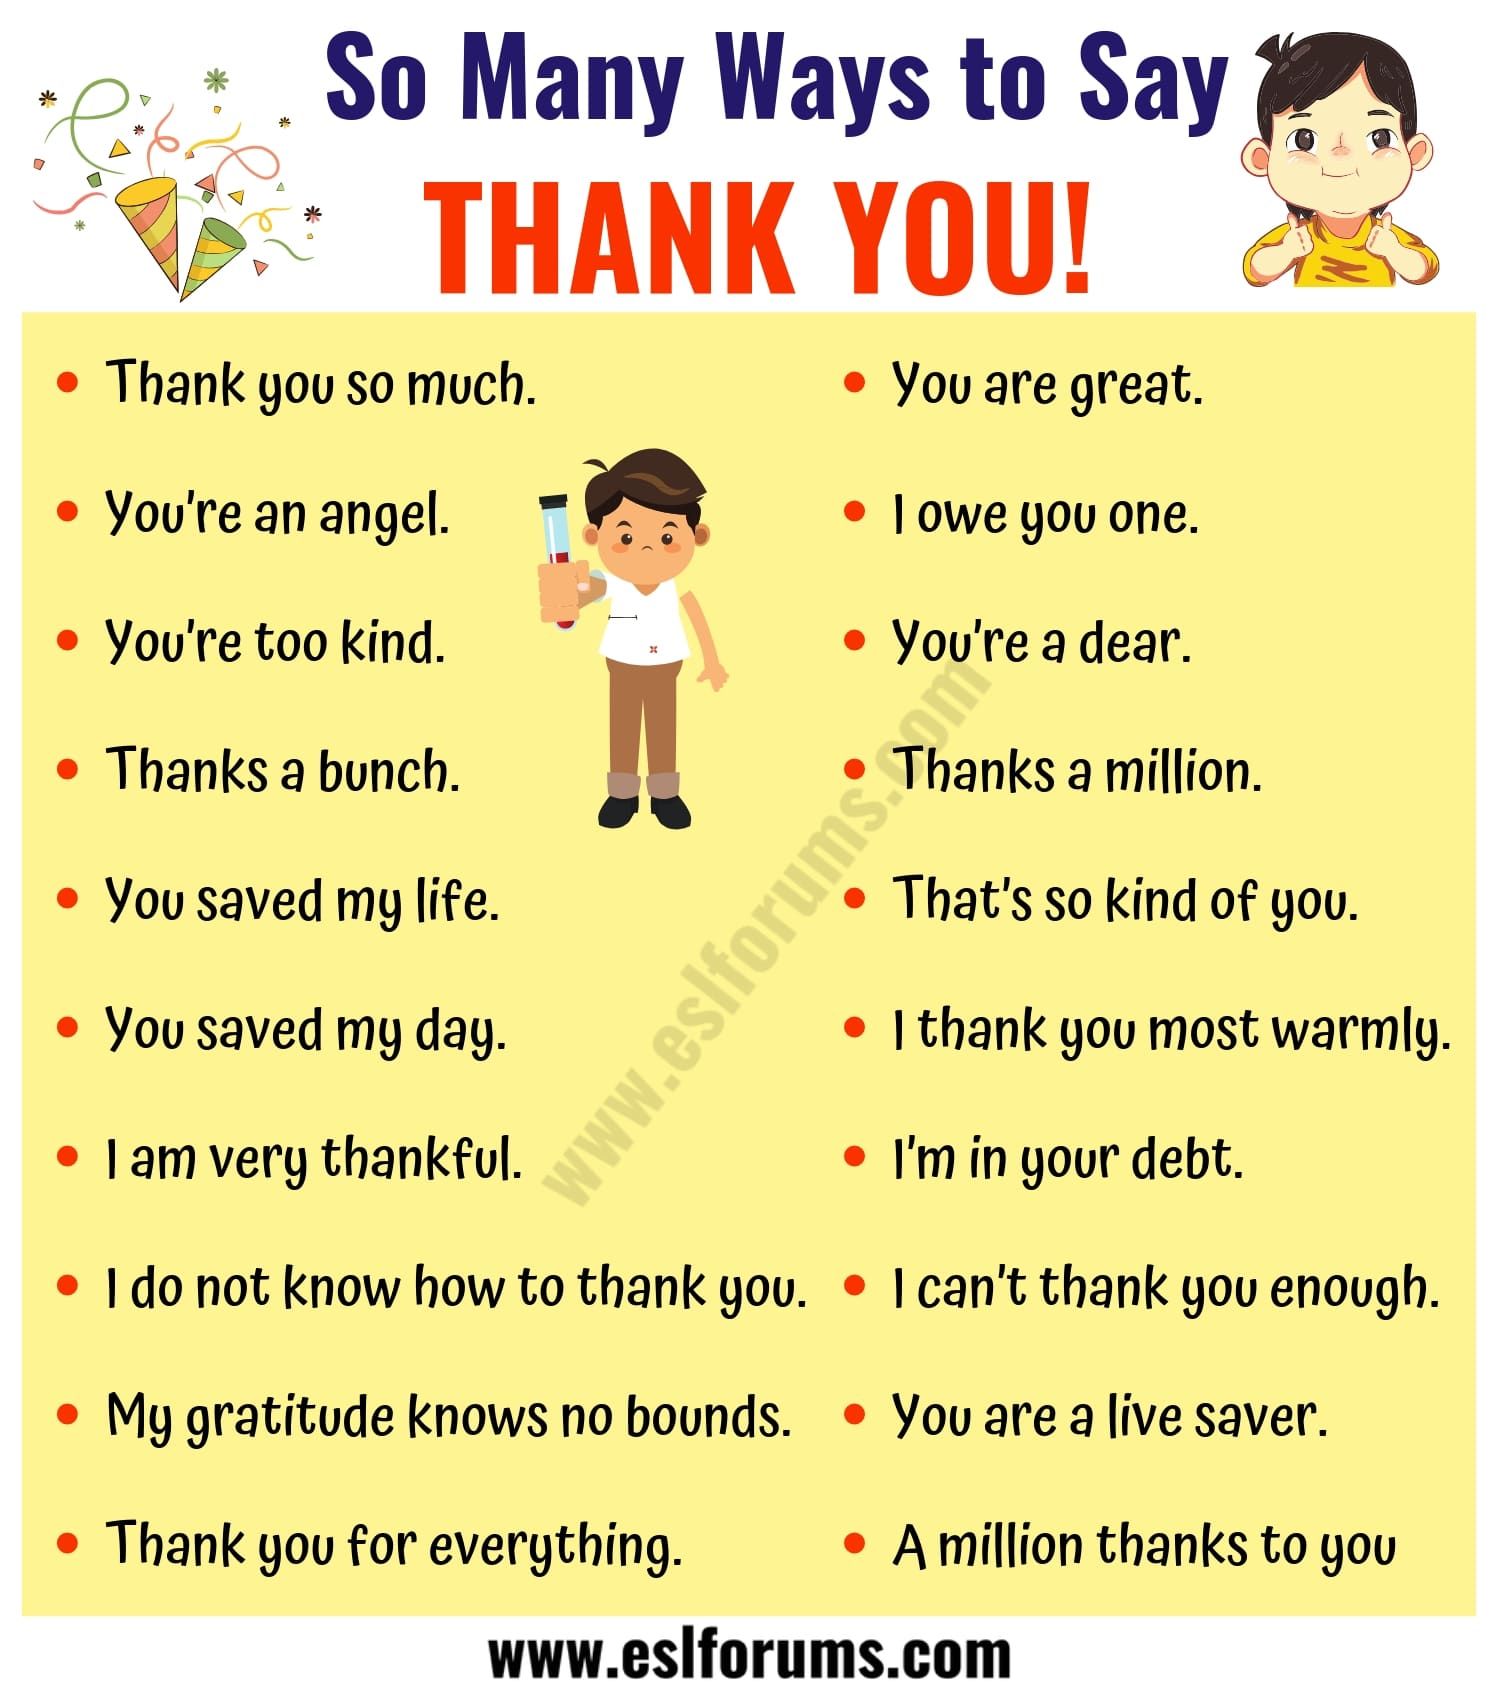 How Do You Say Thank You To The Guest Speaker